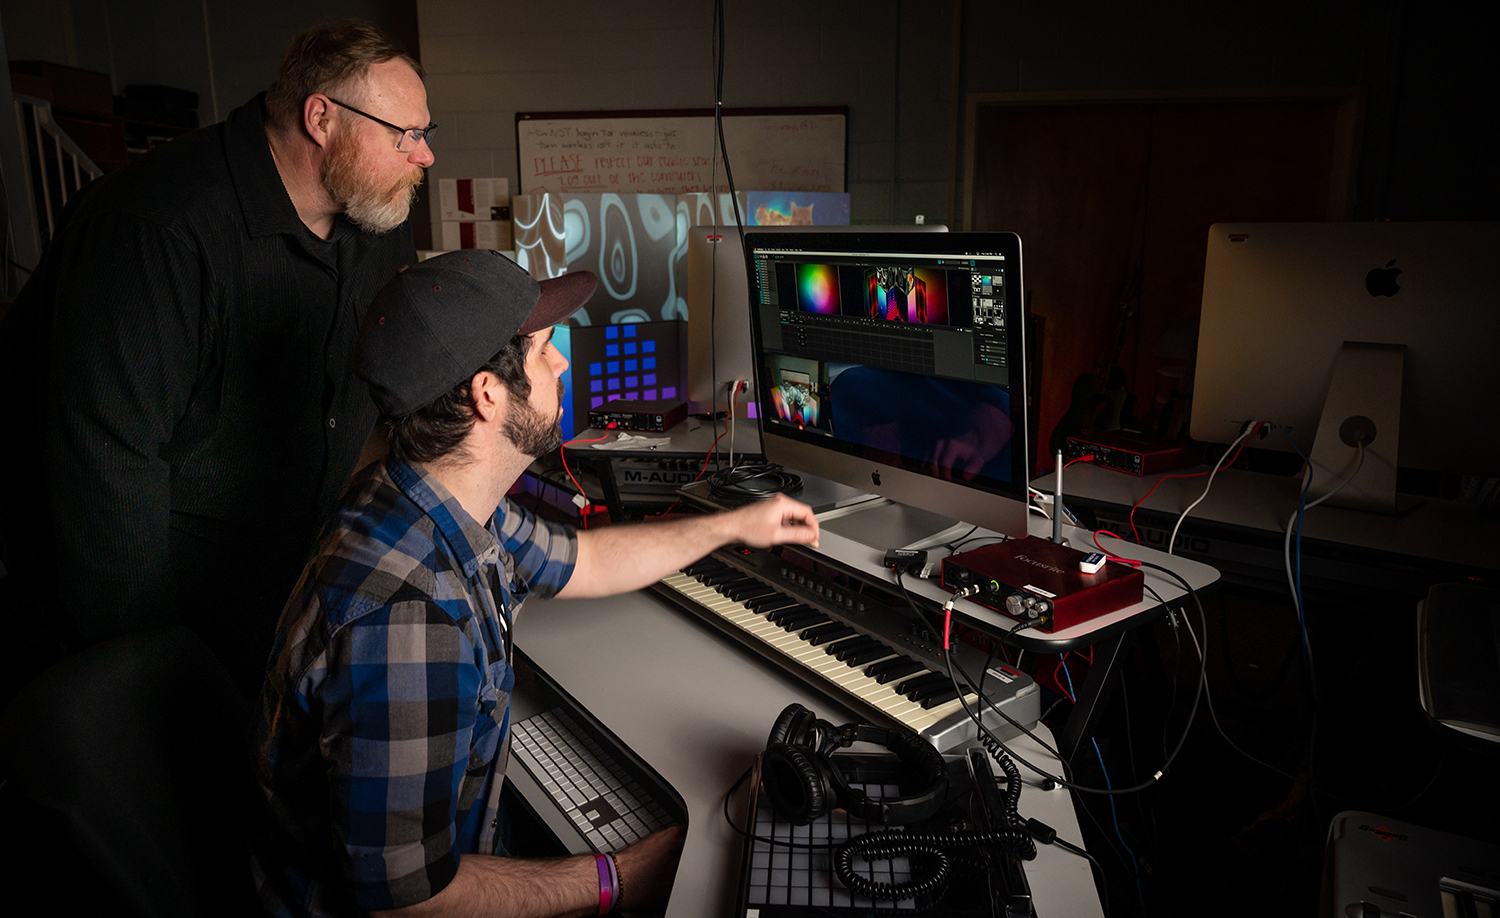 Transylvania students, professor demonstrate connection between projection mapping, liberal arts